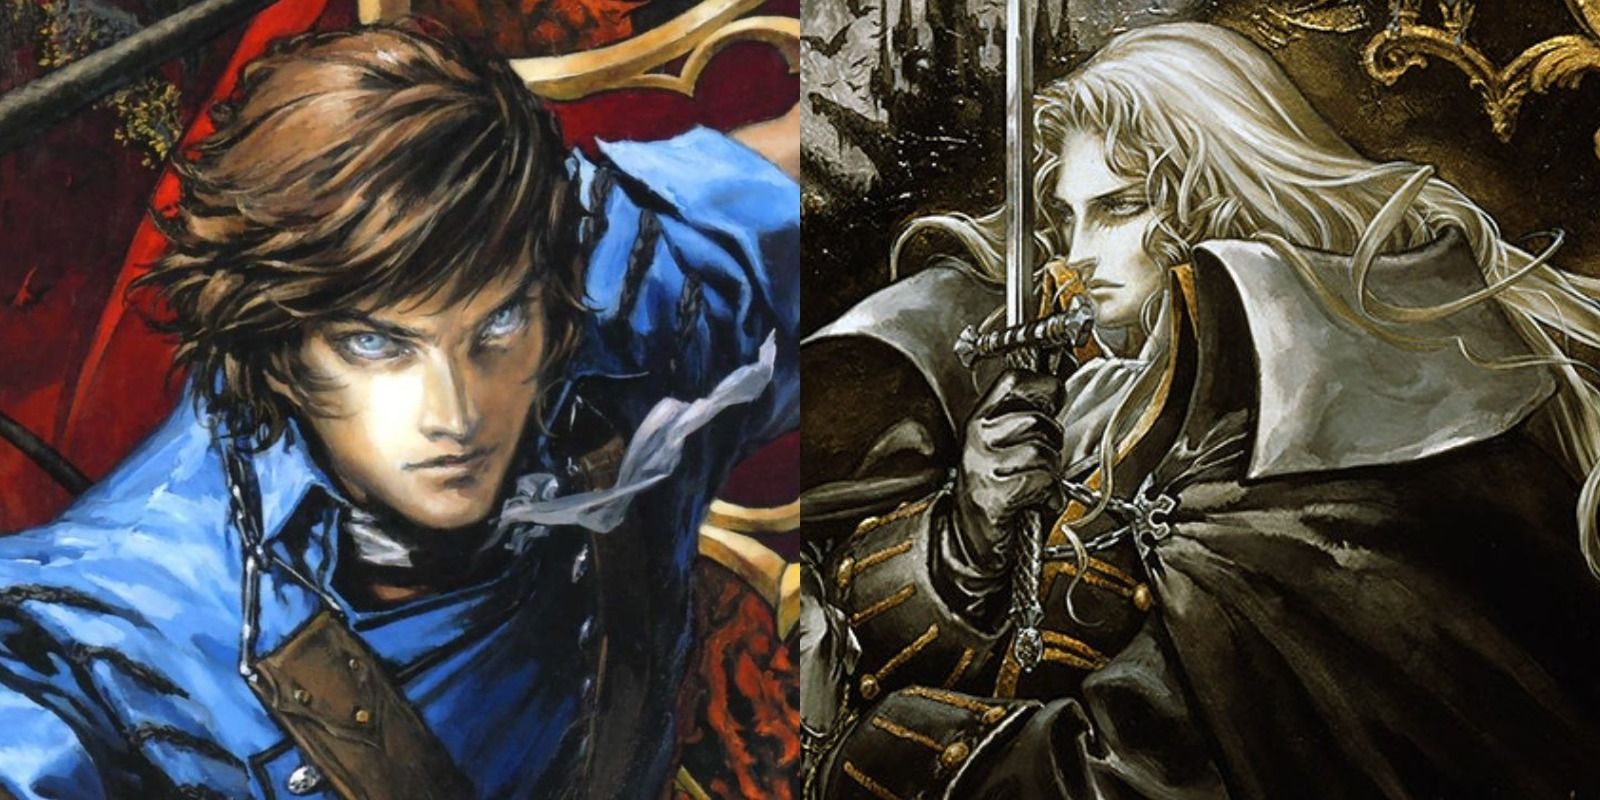 Split image of Richter Belmont in Rondo Of Blood and Alucard in Symphony Of The Night Castlevania games